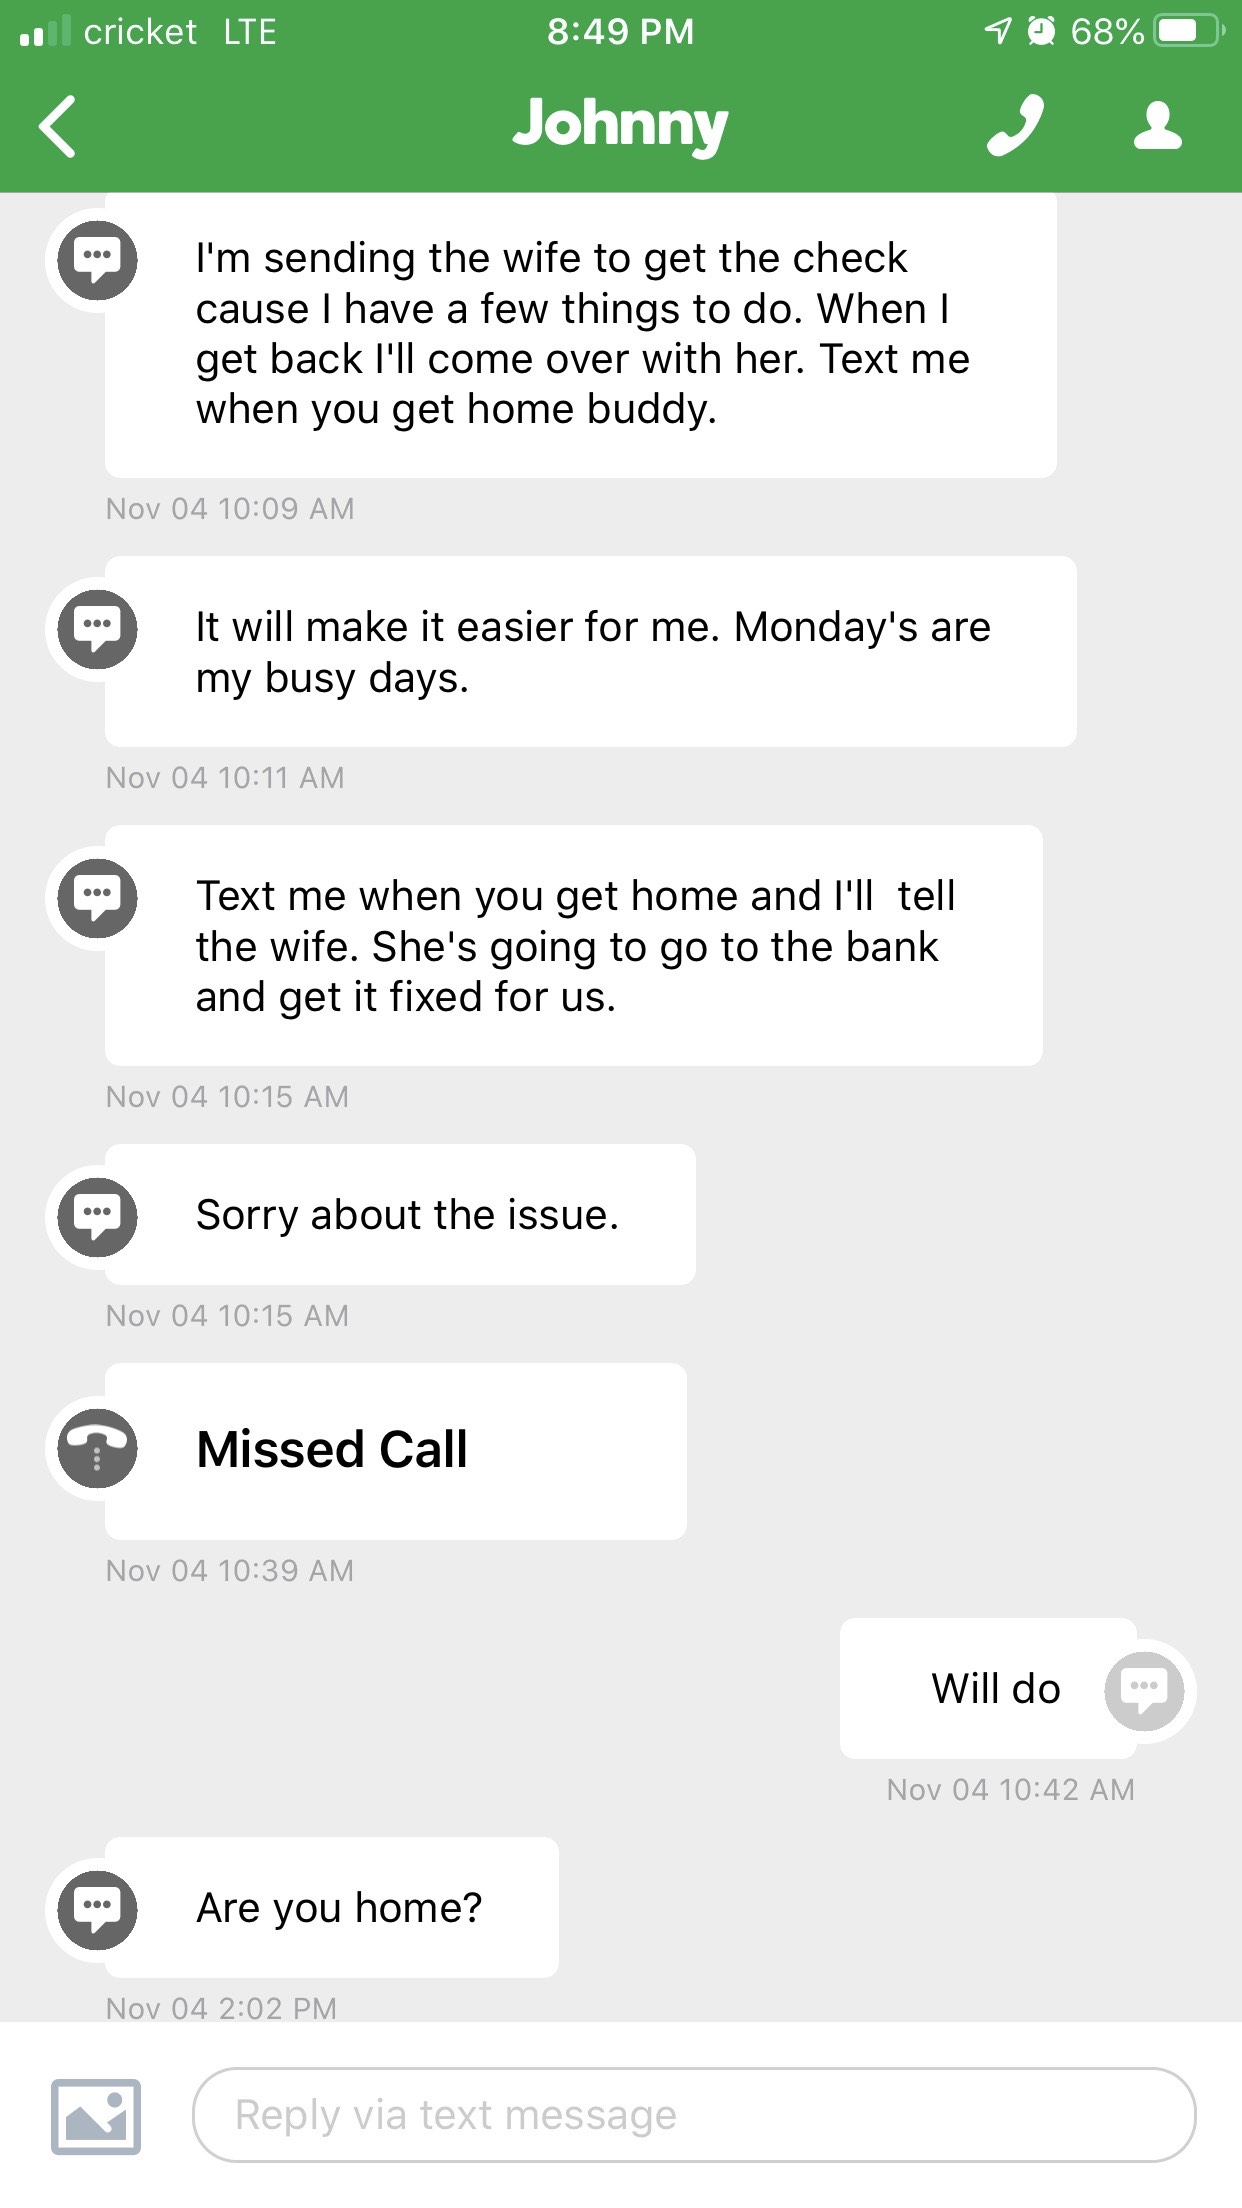 Text Msg Saying They Will Fix It - Never Did